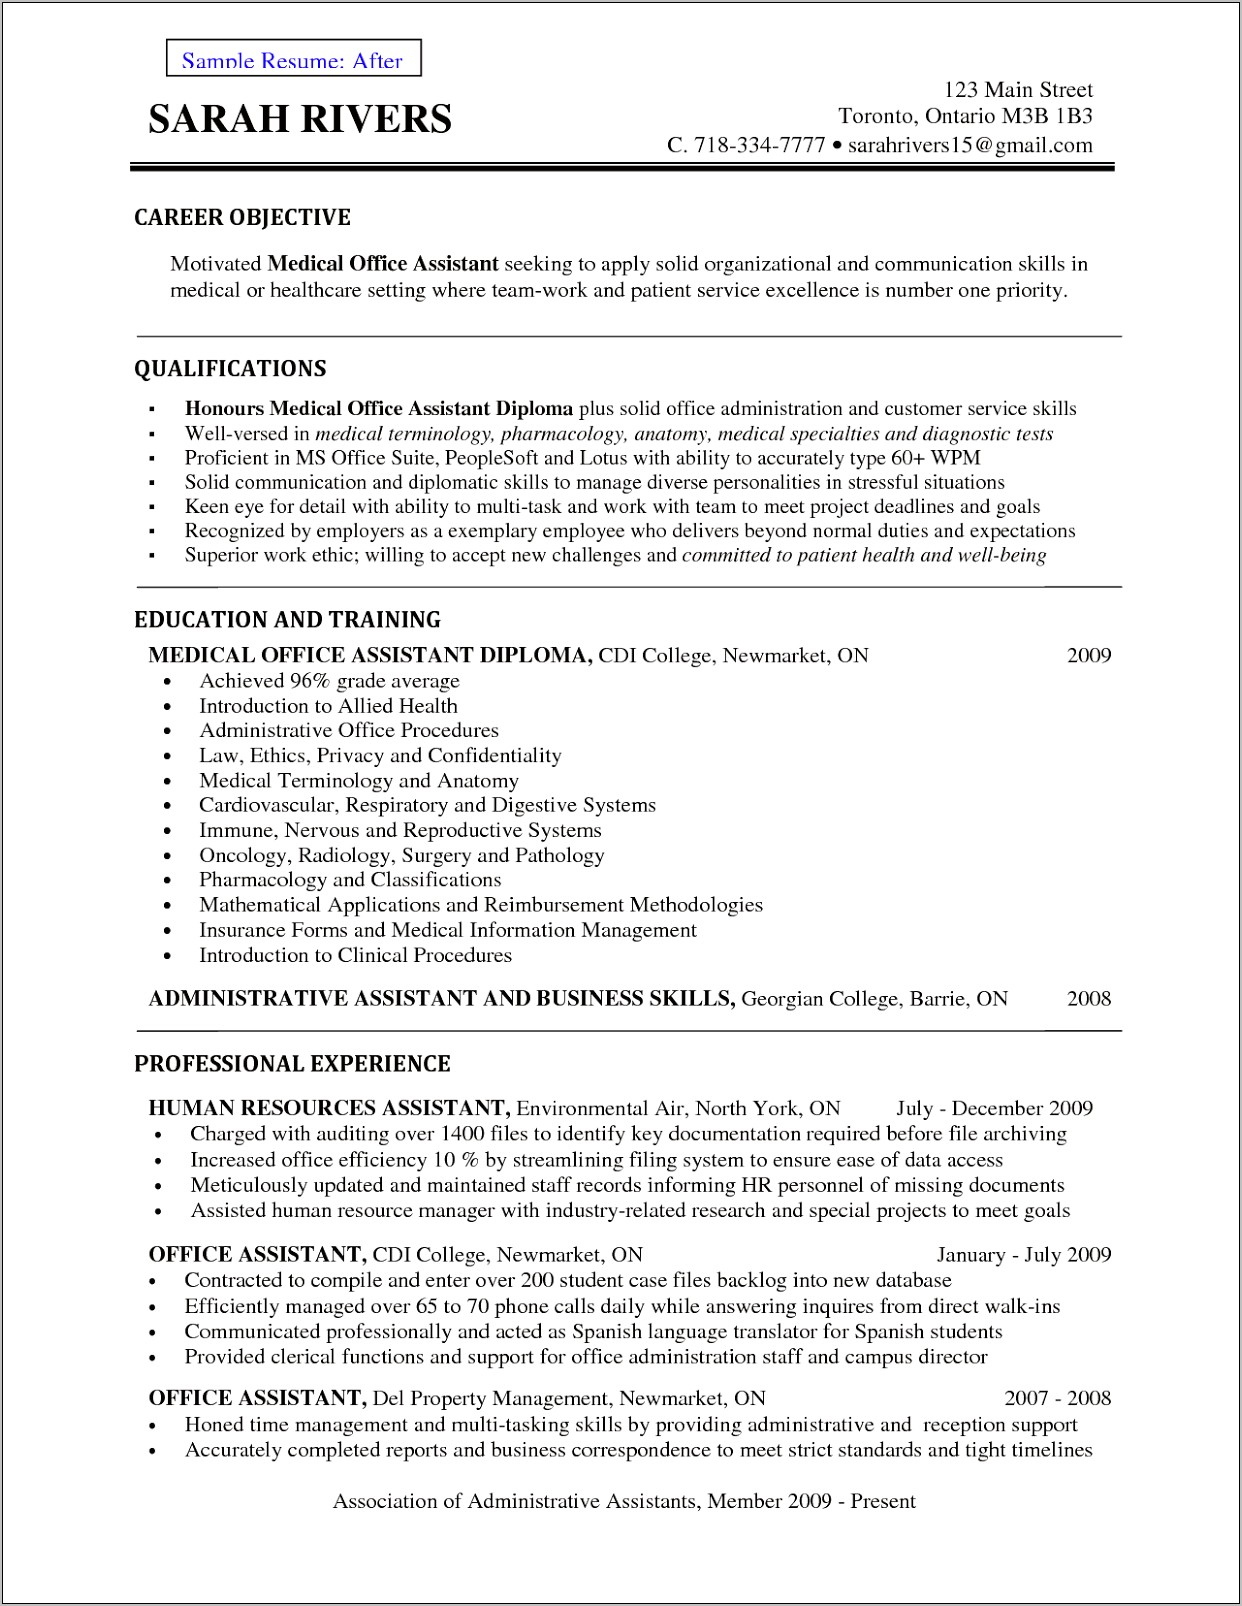 Resume Objective Examples For Office Assistant